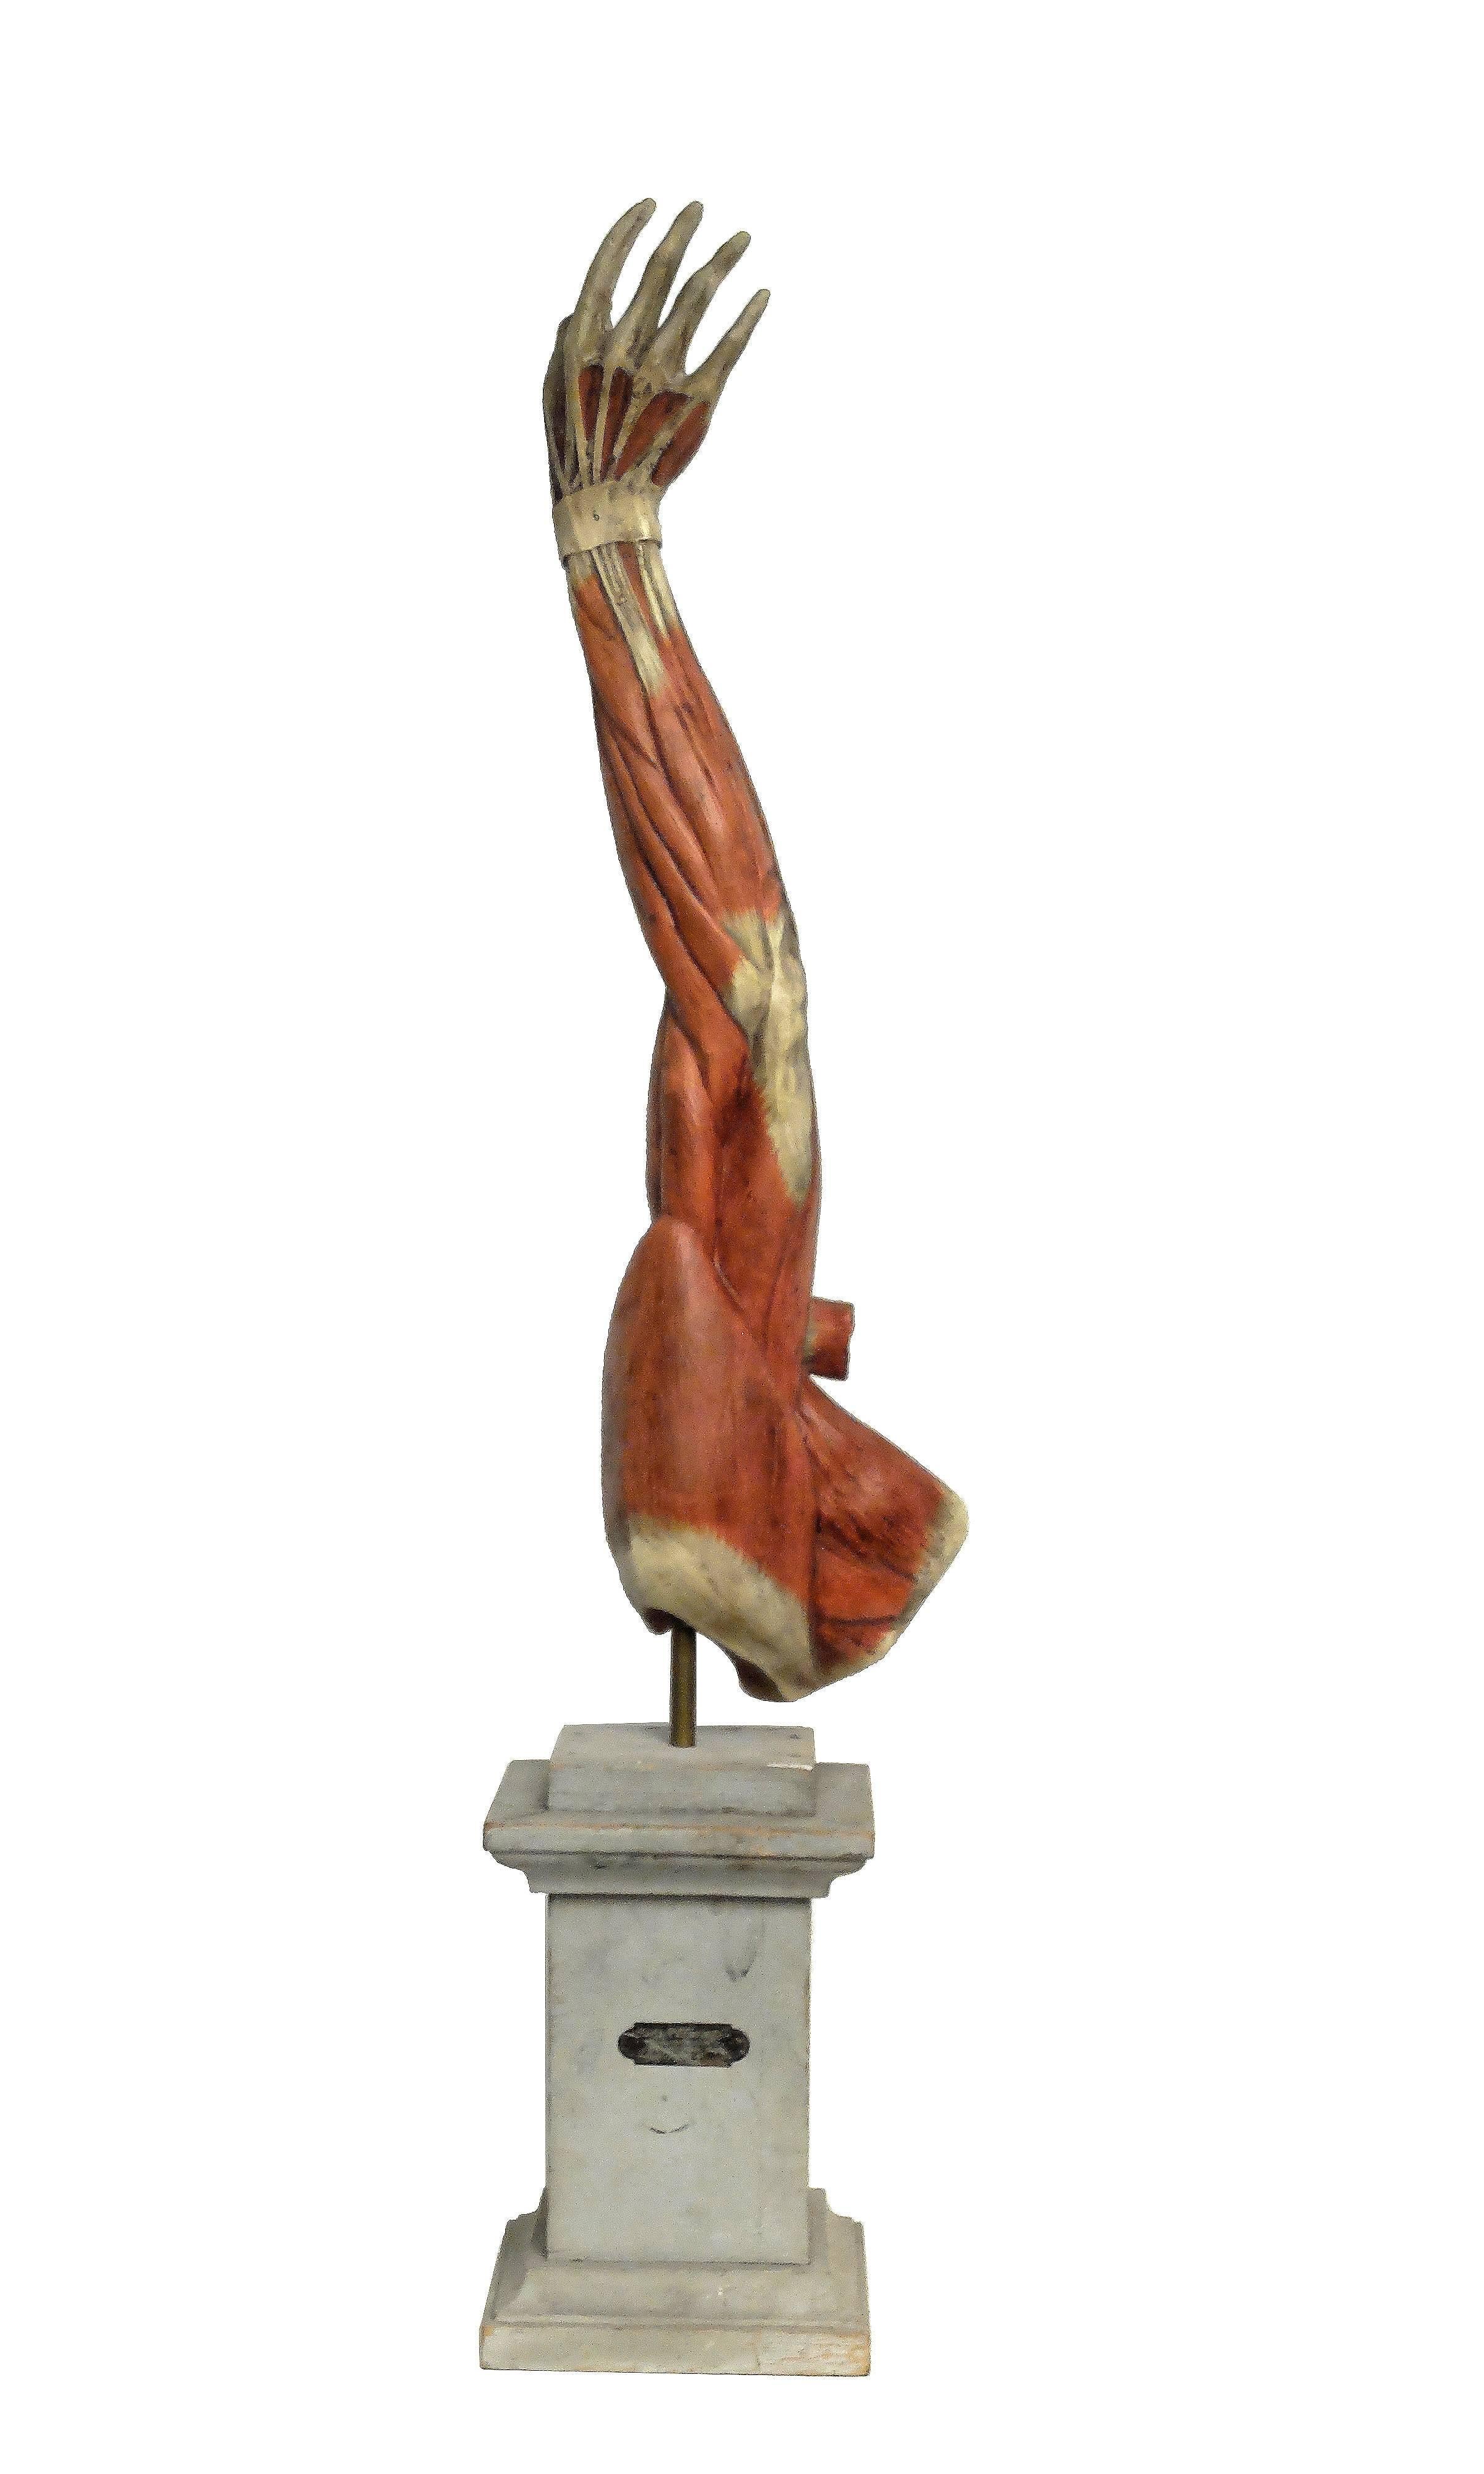 Over a gray painted wooden base, the sculpture of a man’s anatomical model of an arm and handmade out of hand-painted plaster and papier mâché; the external side depicts the skin and the muscles highly detailed. Maker Paravia, Italy, circa 1890.